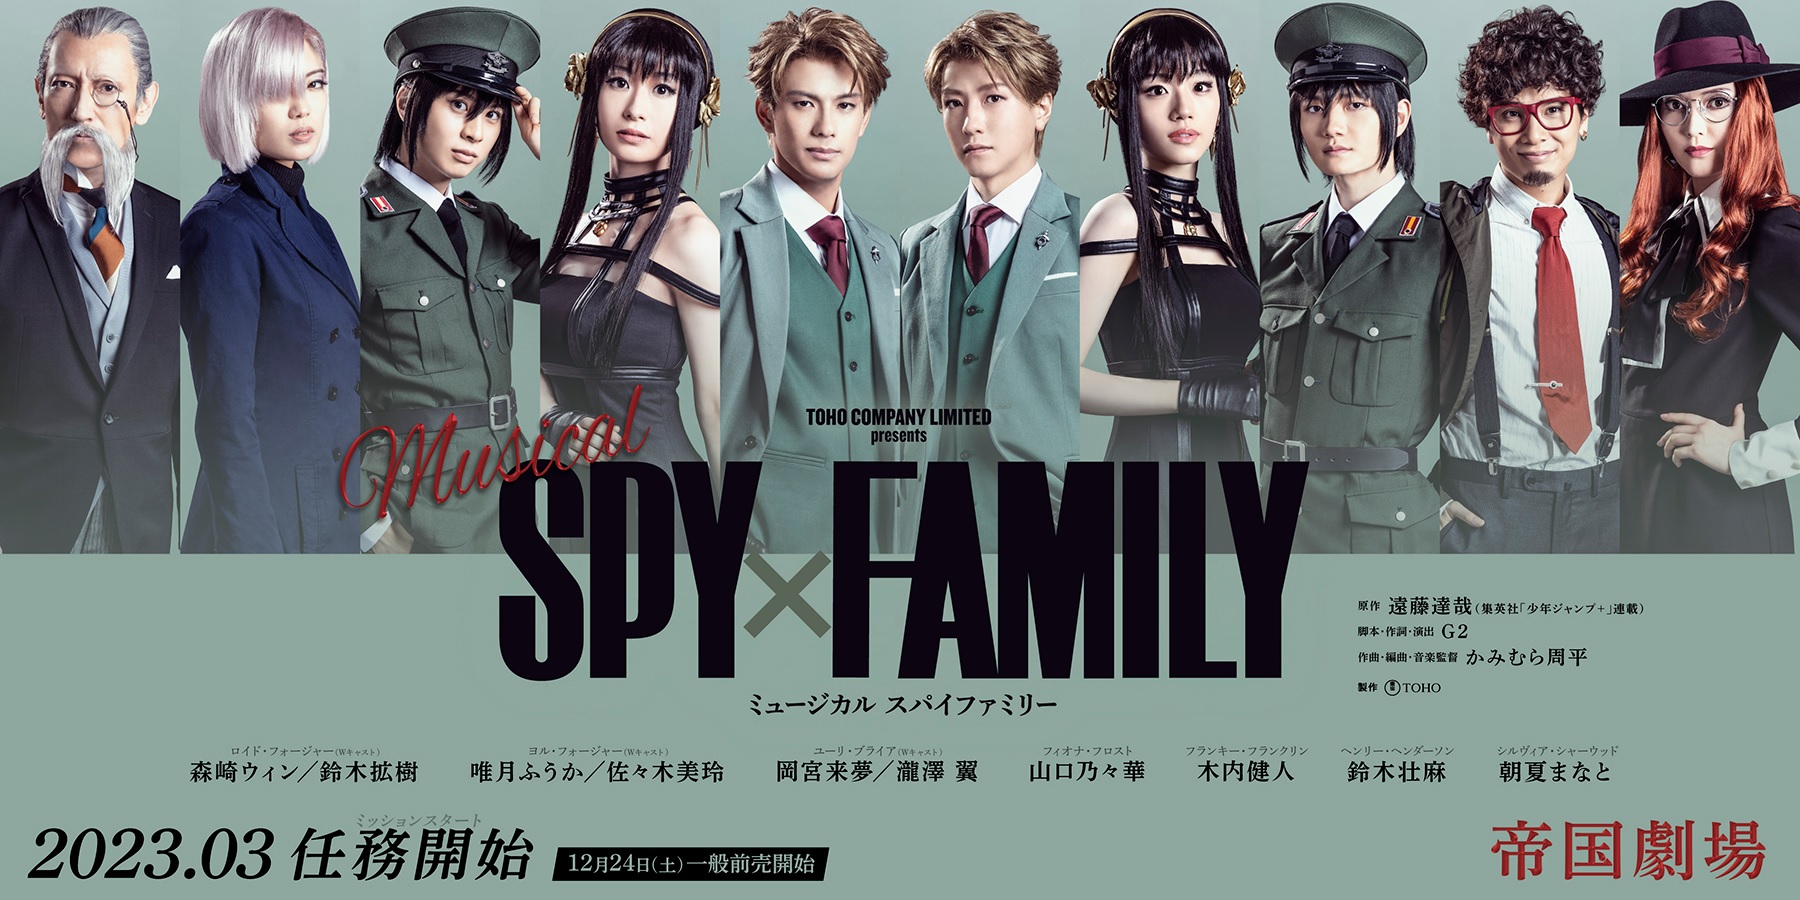 First live-action Spy x Family stage play video previews more in 